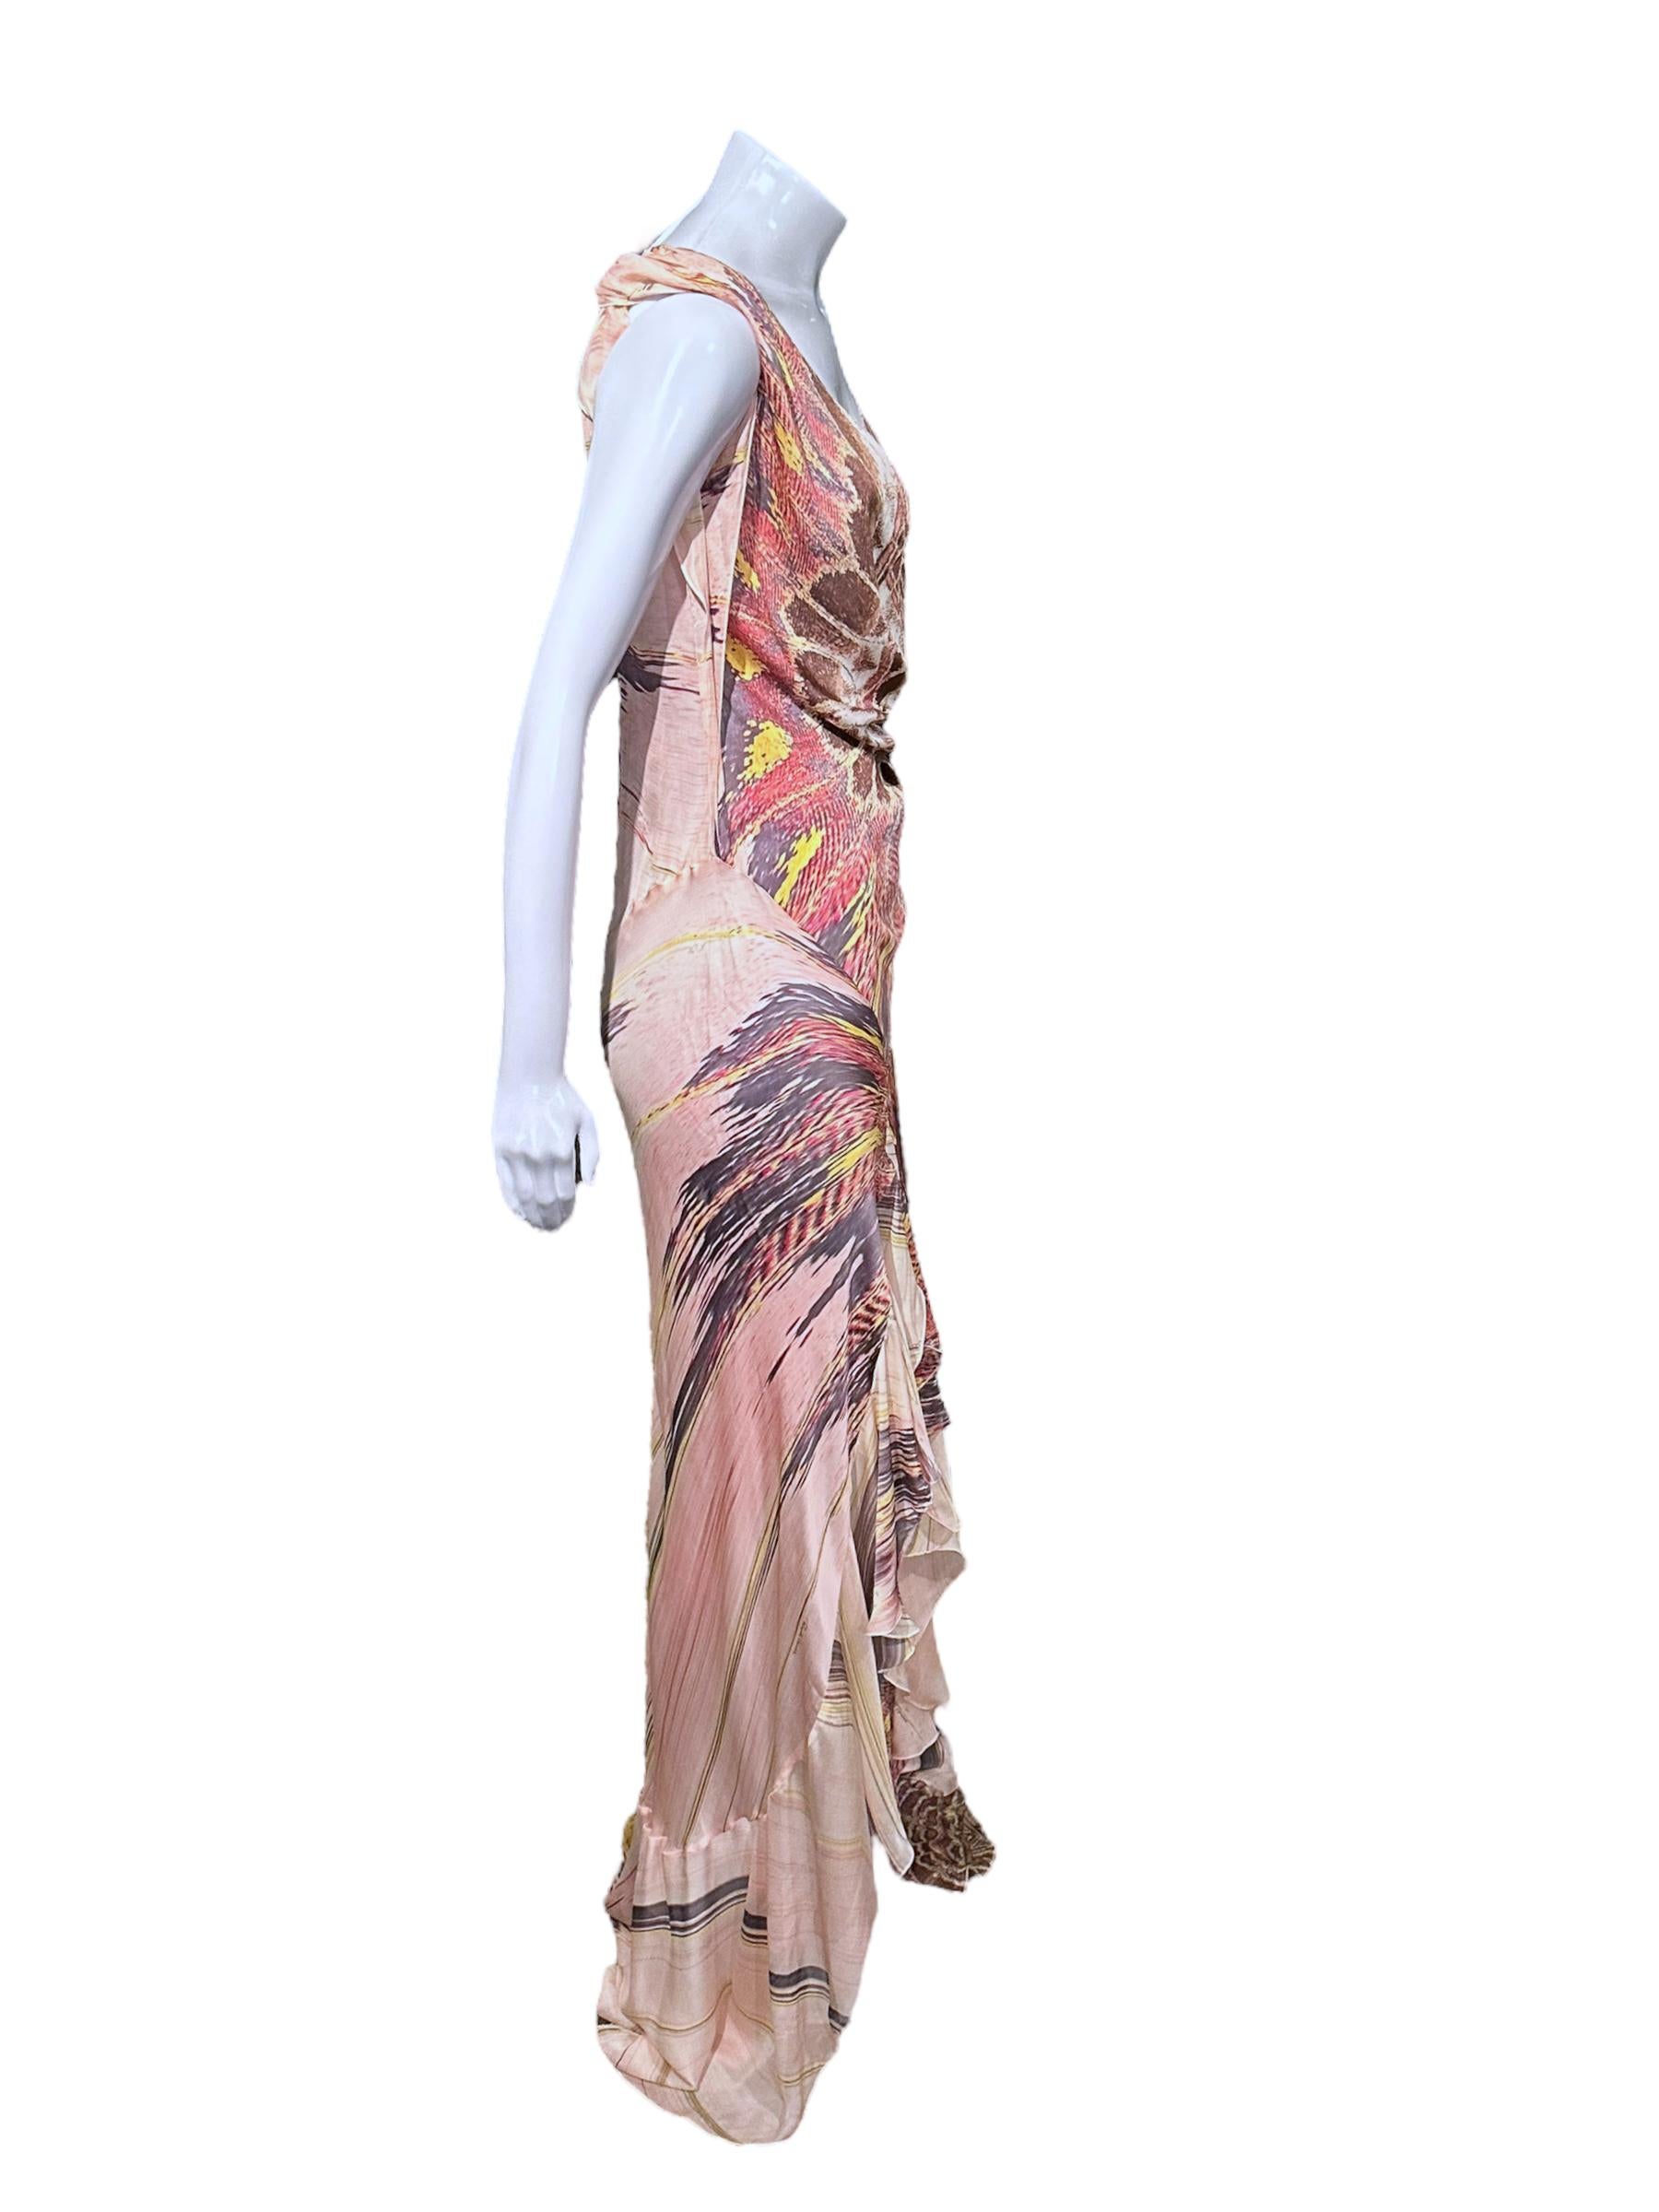 Roberto Cavalli Iconic Feather Print Ss 2004 Cowl Neck Flowy Silk Slip Gown For Sale 1